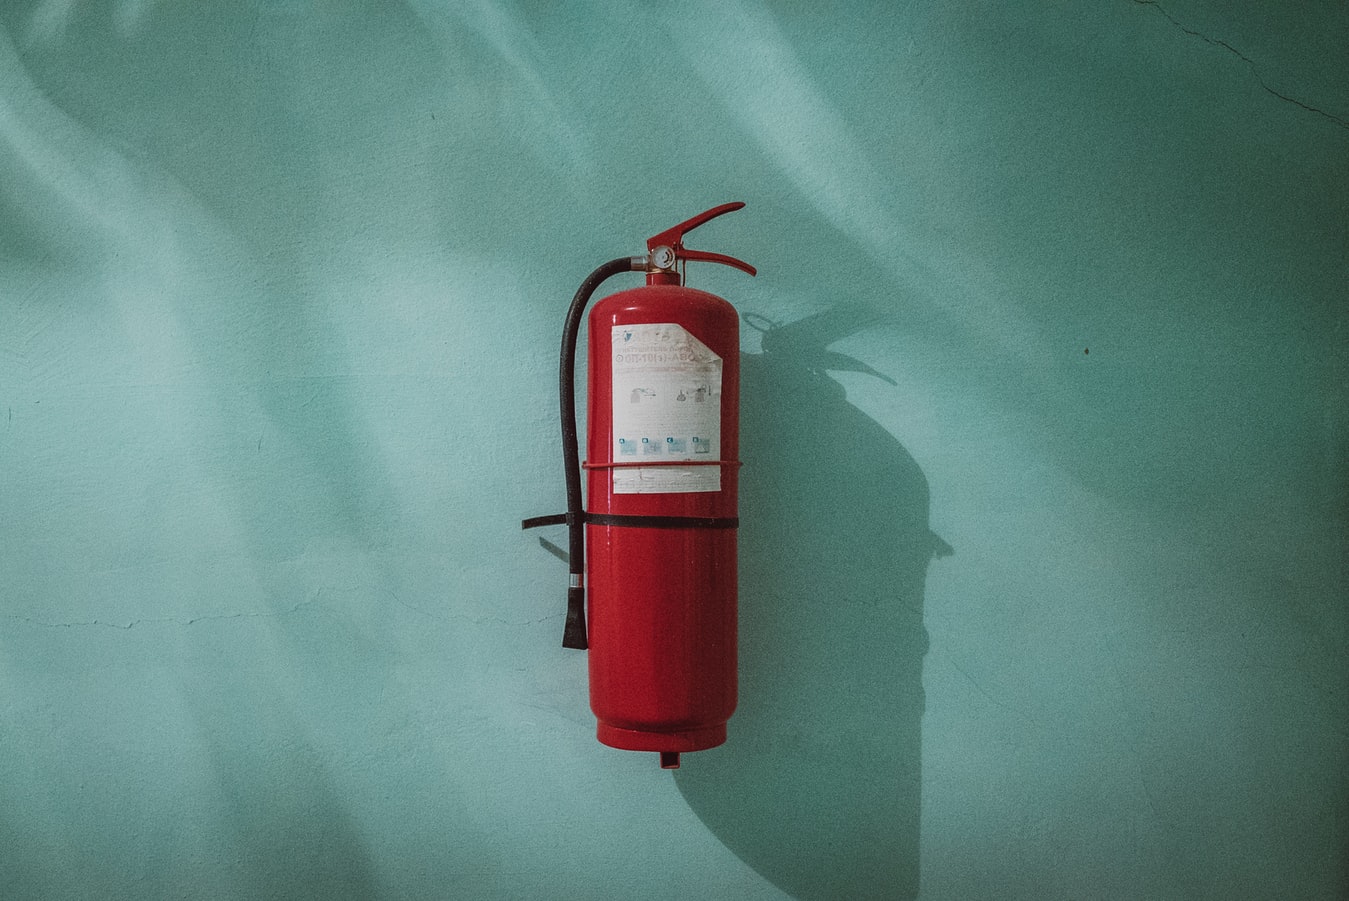 How can I check if my fire extinguisher service provider is certified?